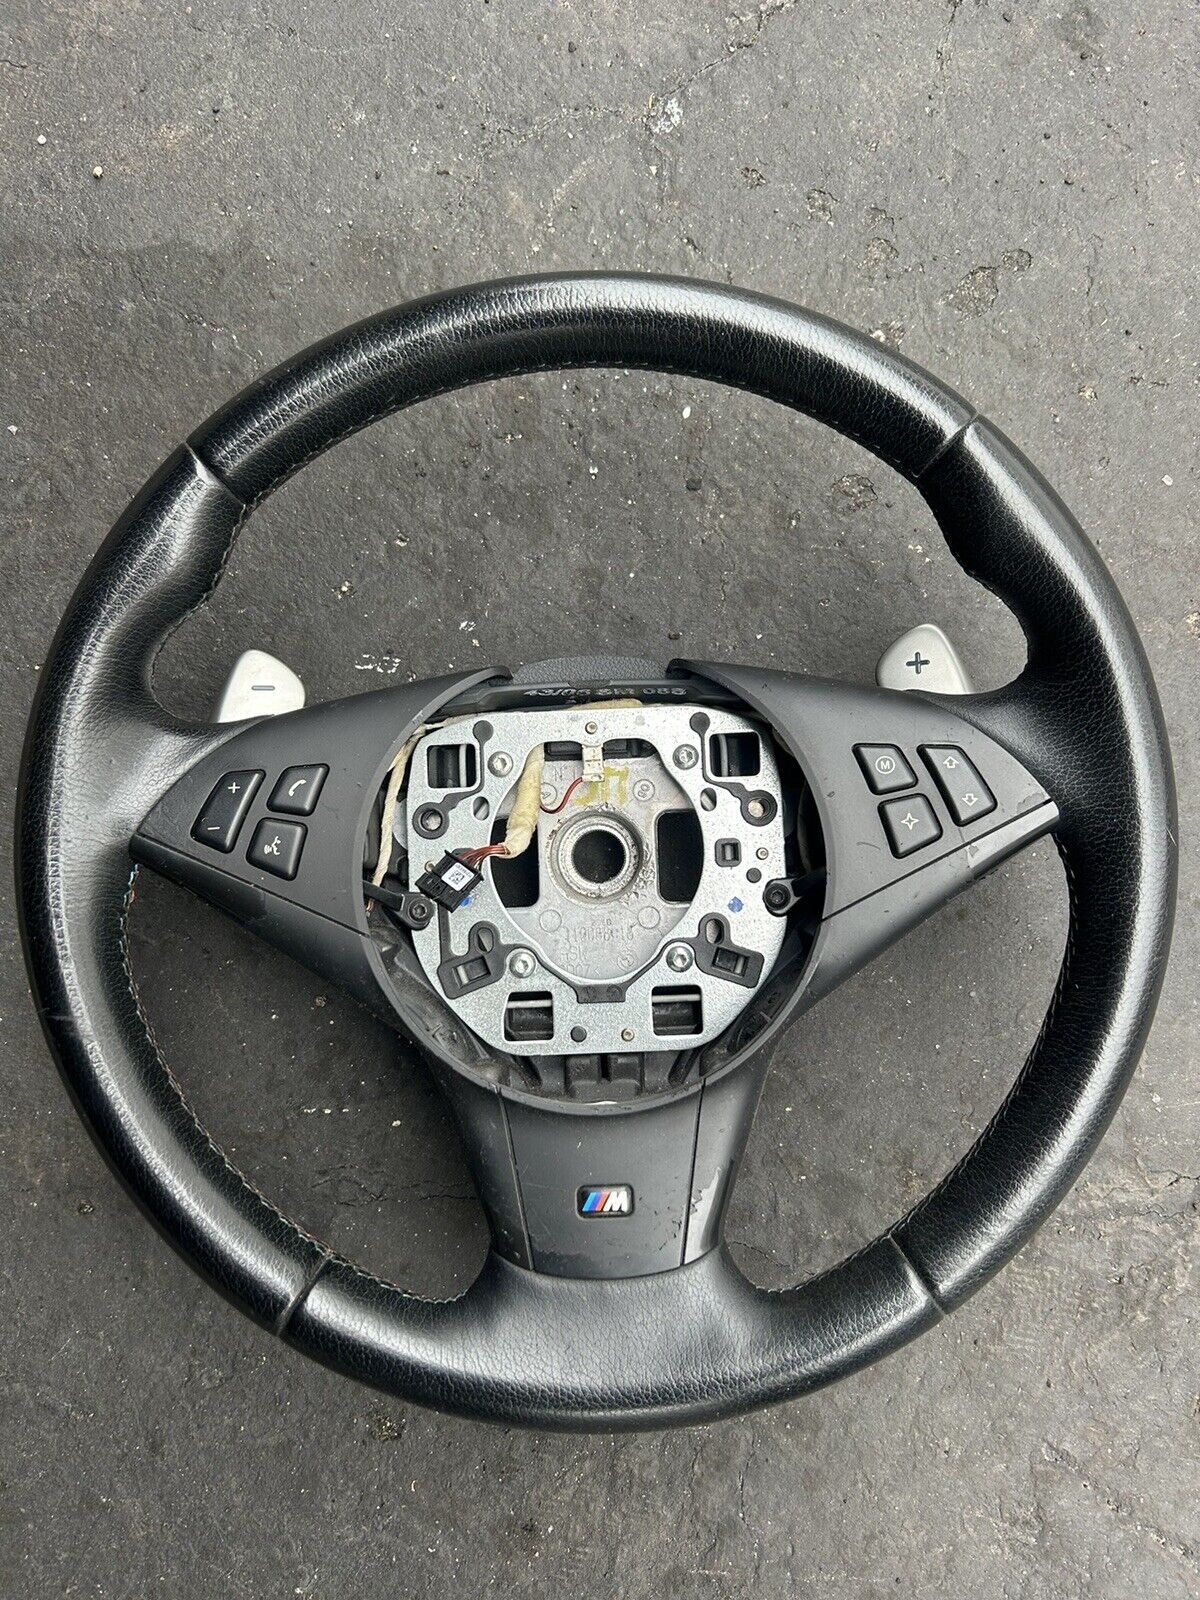 BMW E60 E63 E64 M5 M6 2006-2007 OEM LEFT WHEEL WITH PADDLE SHIFTERS SWITCHES